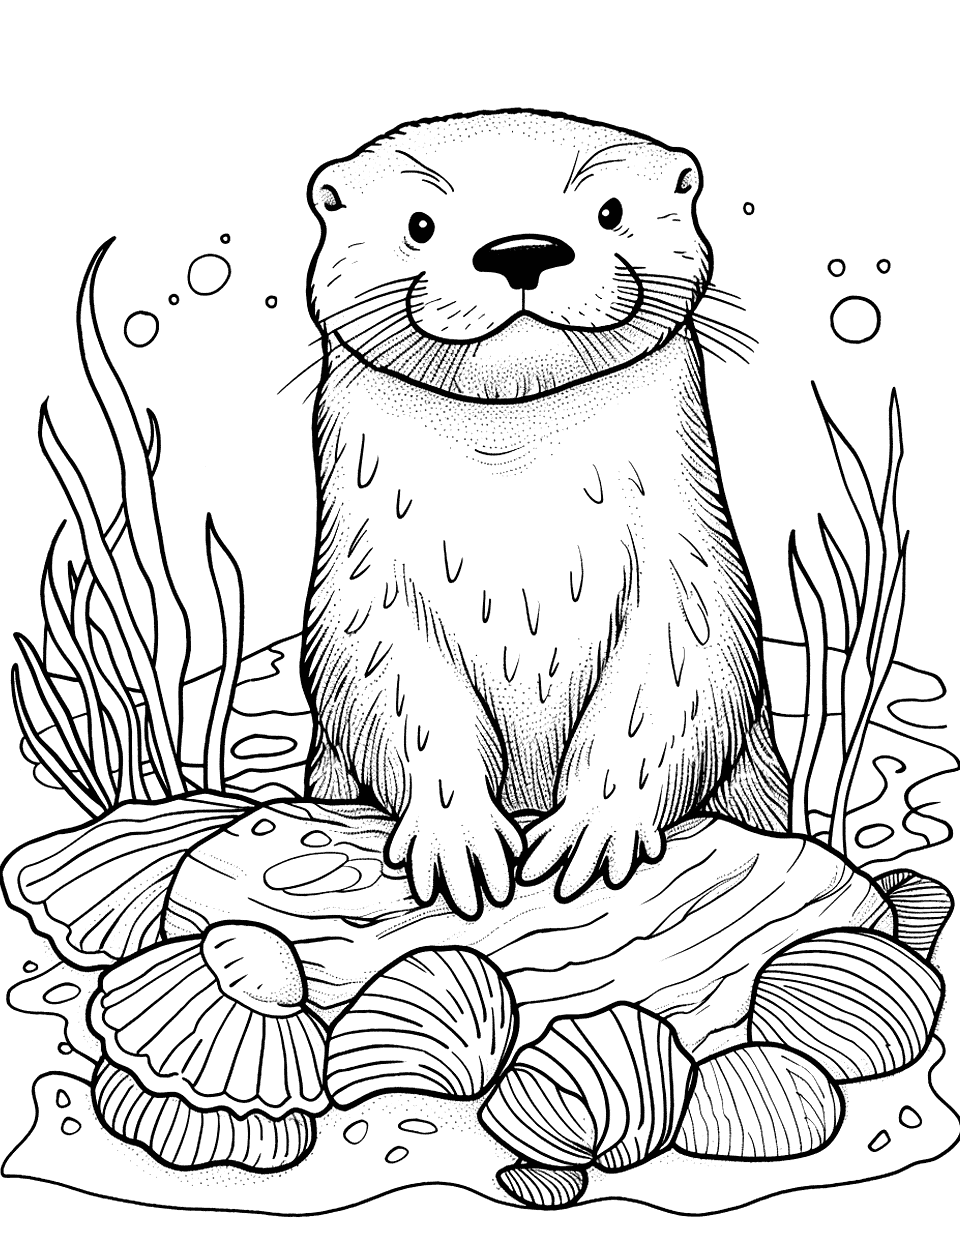 Sea Otter with Seashells Coloring Page - A sea otter surrounded by various seashells on the ocean floor.